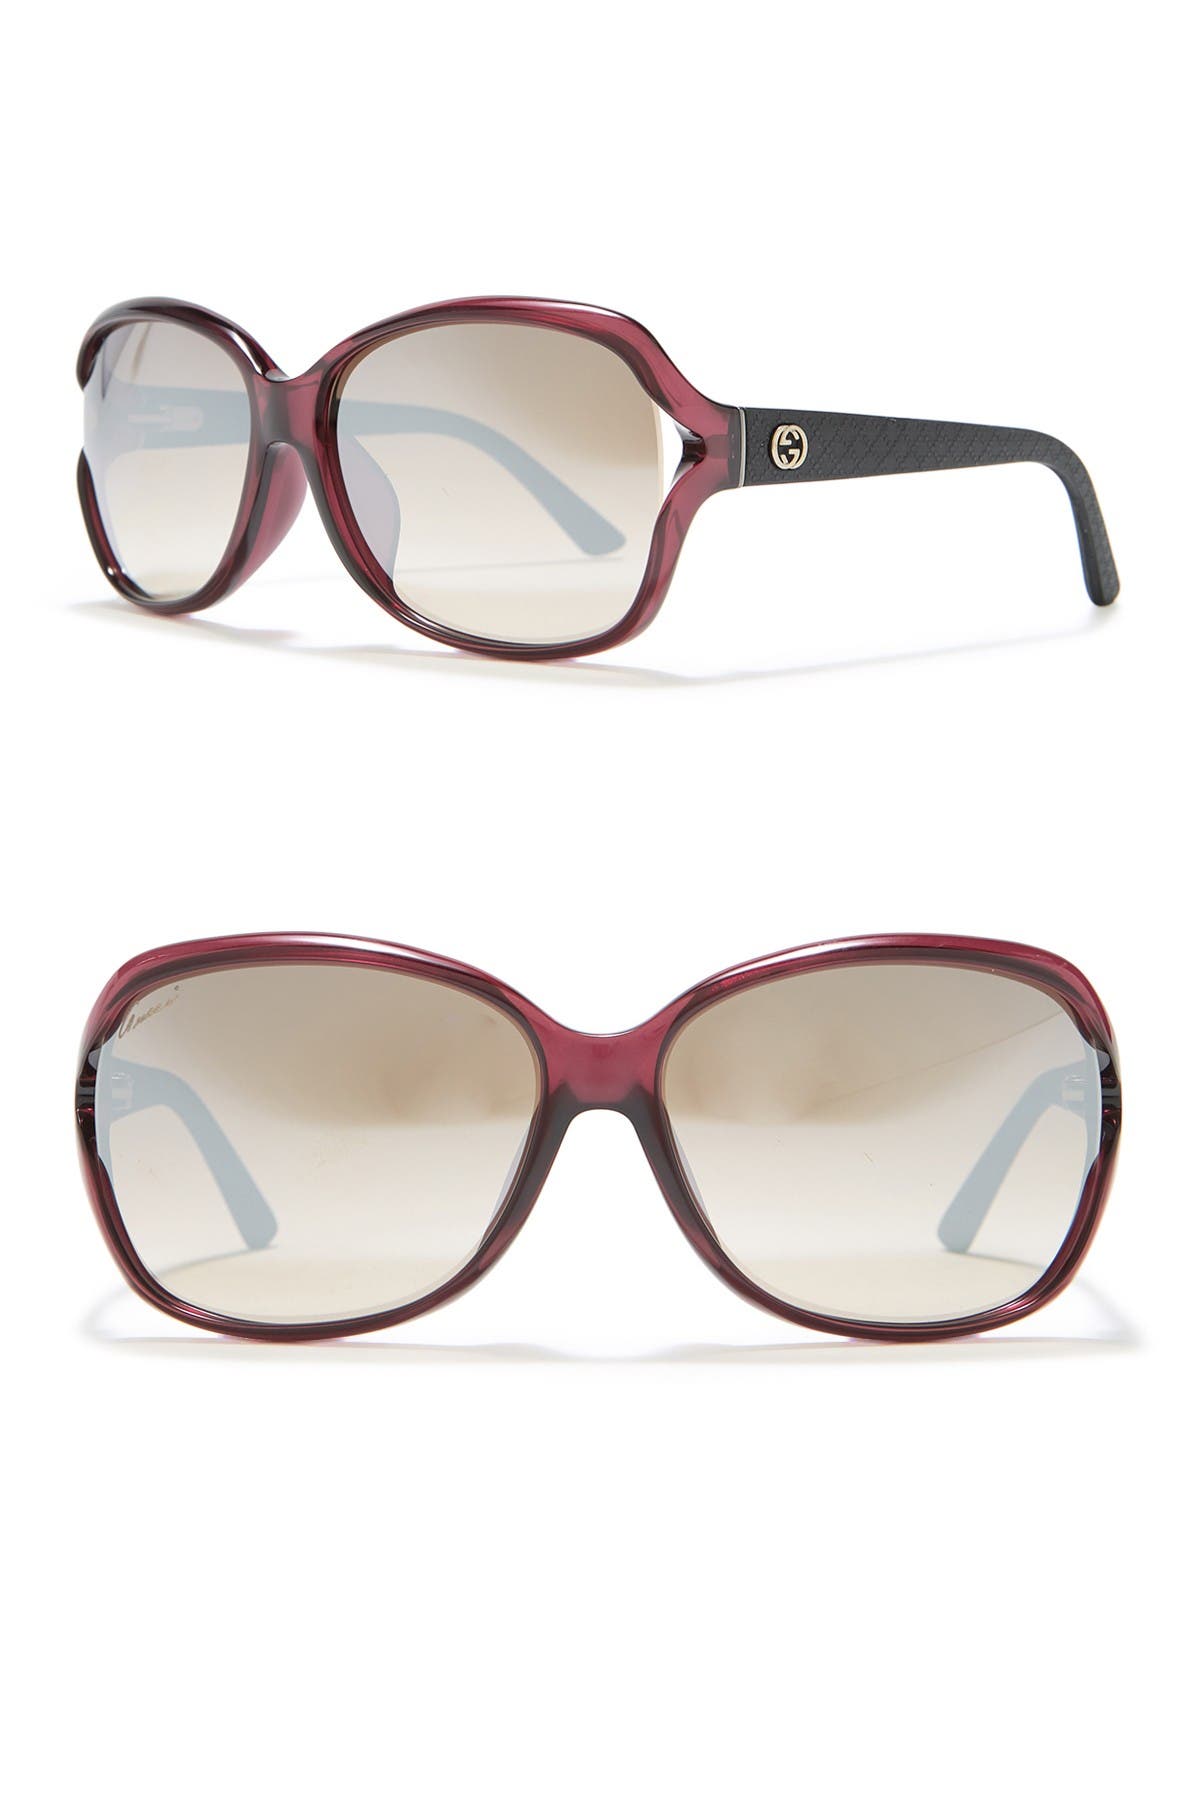 Gucci 61mm Round Sunglasses In Assorted